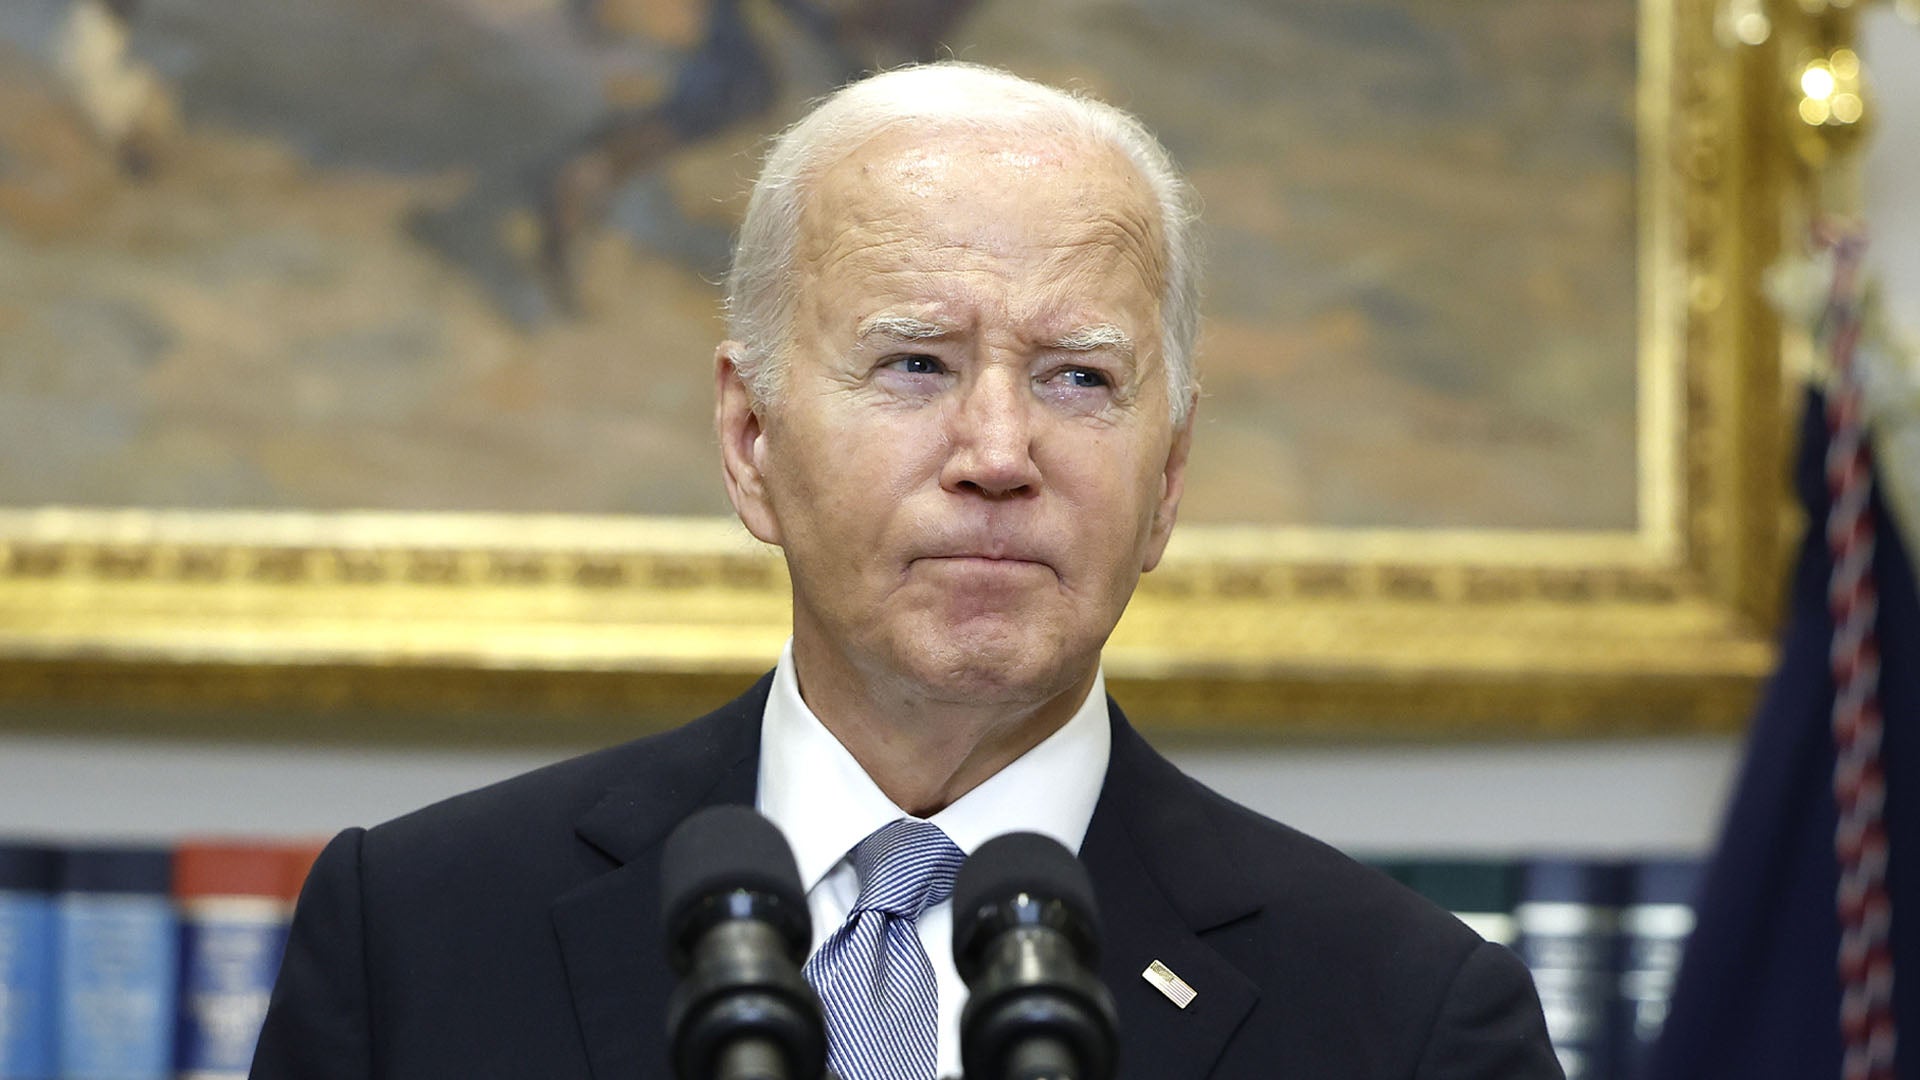 President Joe Biden Announces He’s Dropping Out of the 2024 Election